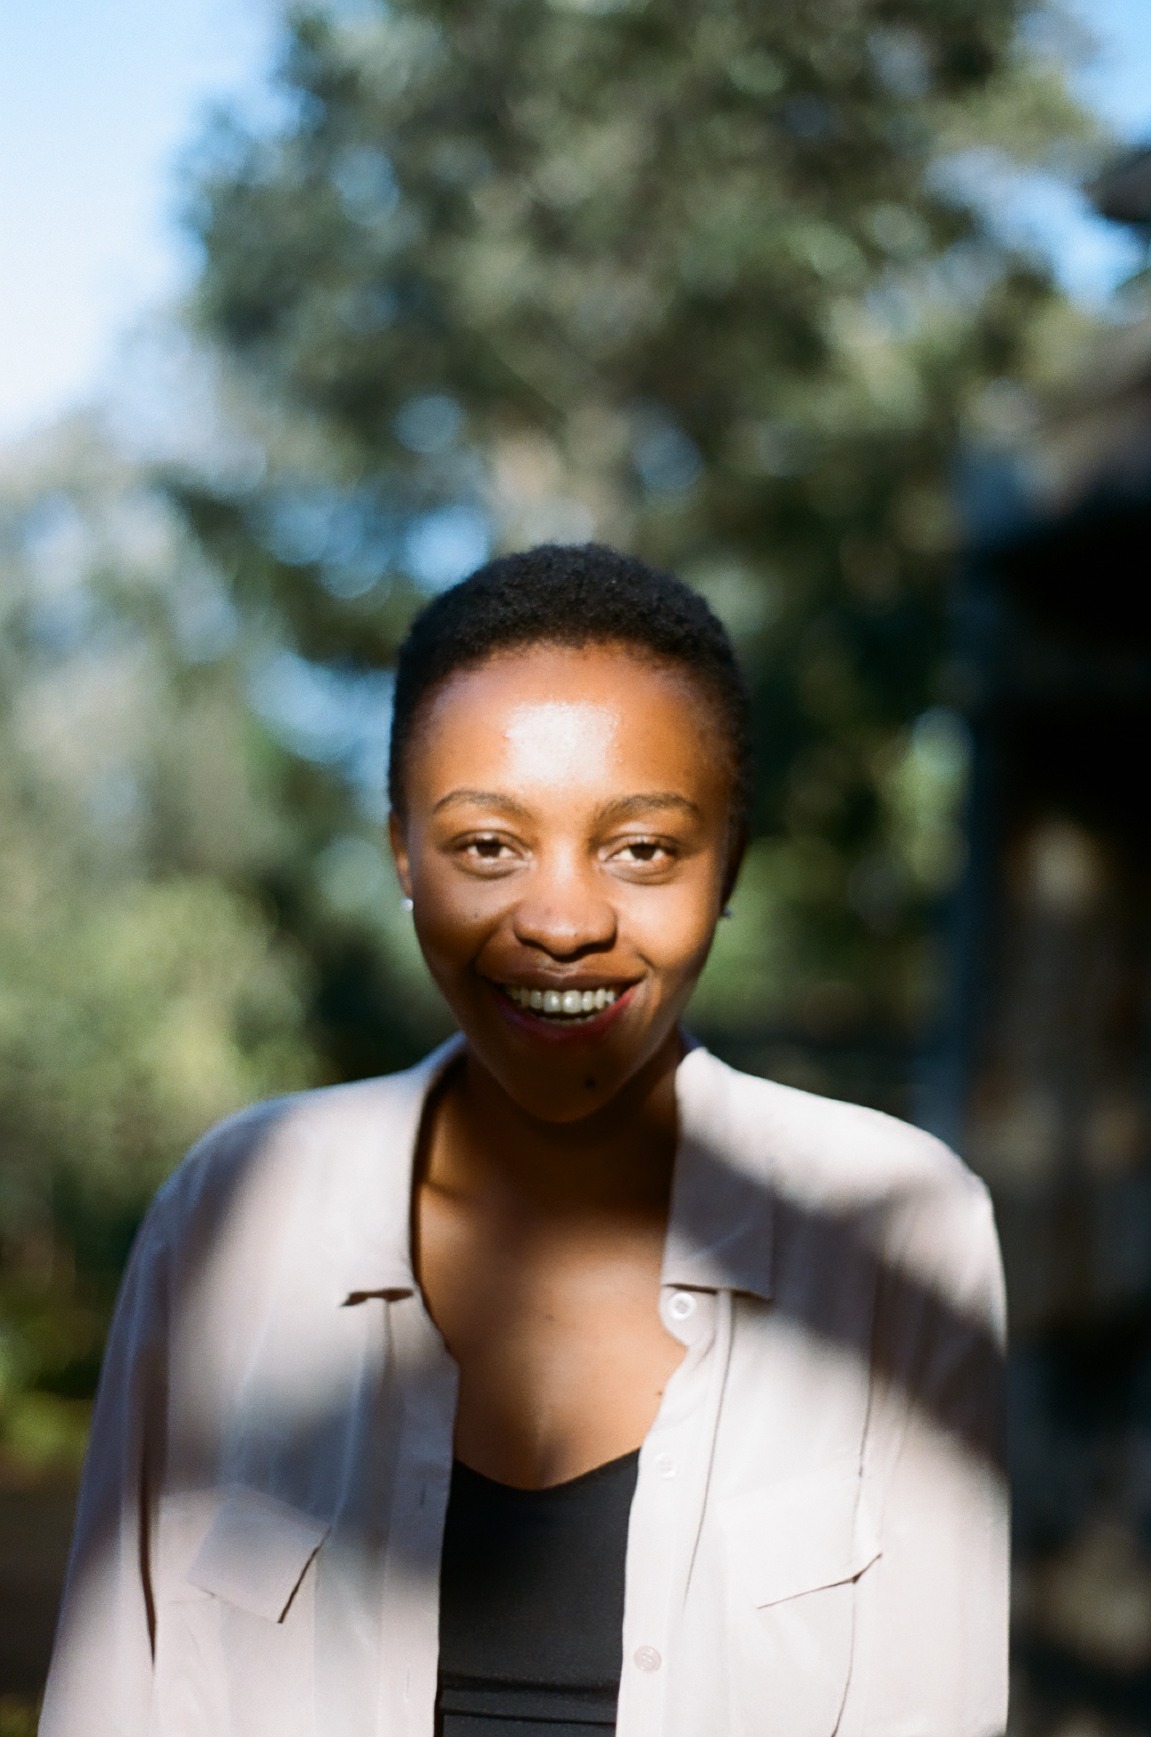 Photo portrait of young African woman smiling with short haird and a white blouse on top of a black top.